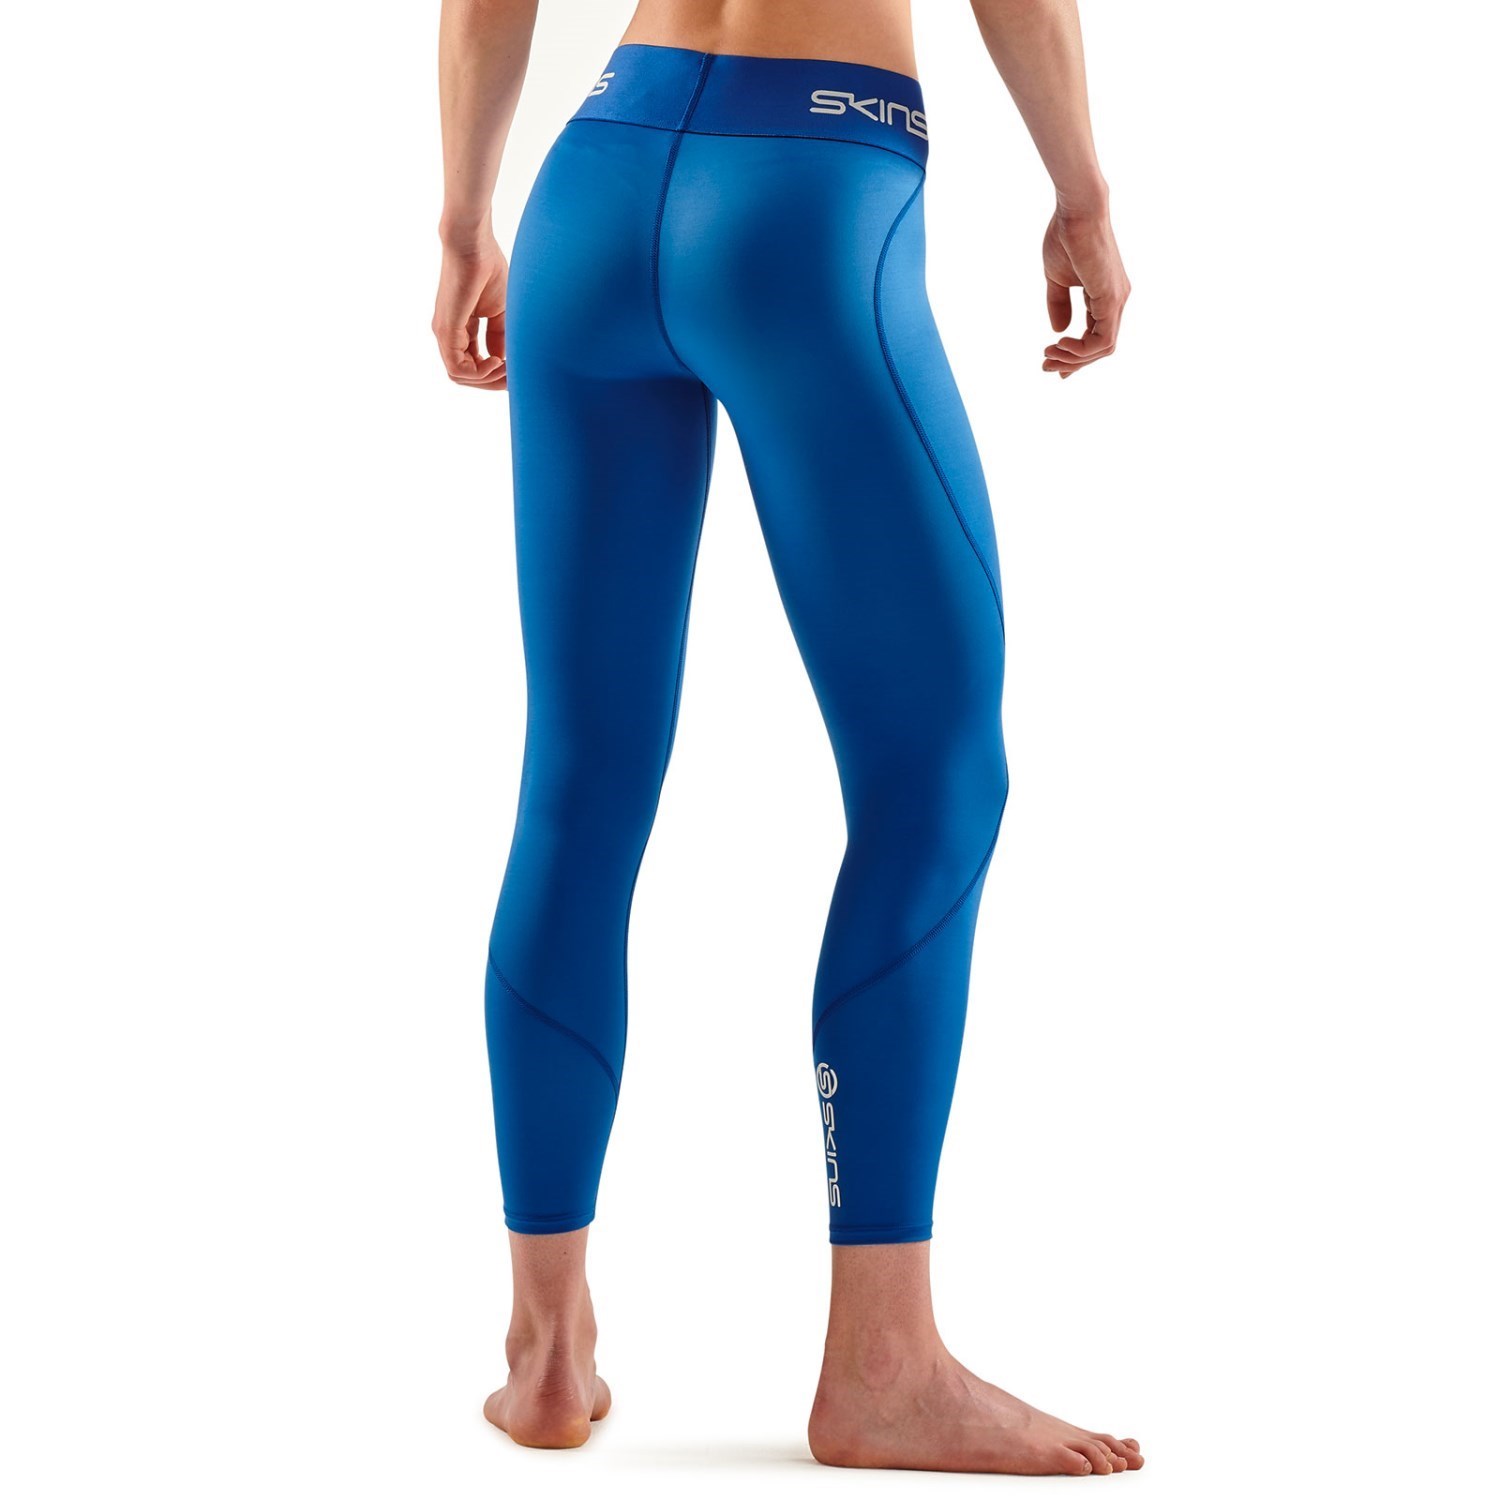 Buy Skins Women's DNAmic Performance Compression Capri 3/4 Tights at